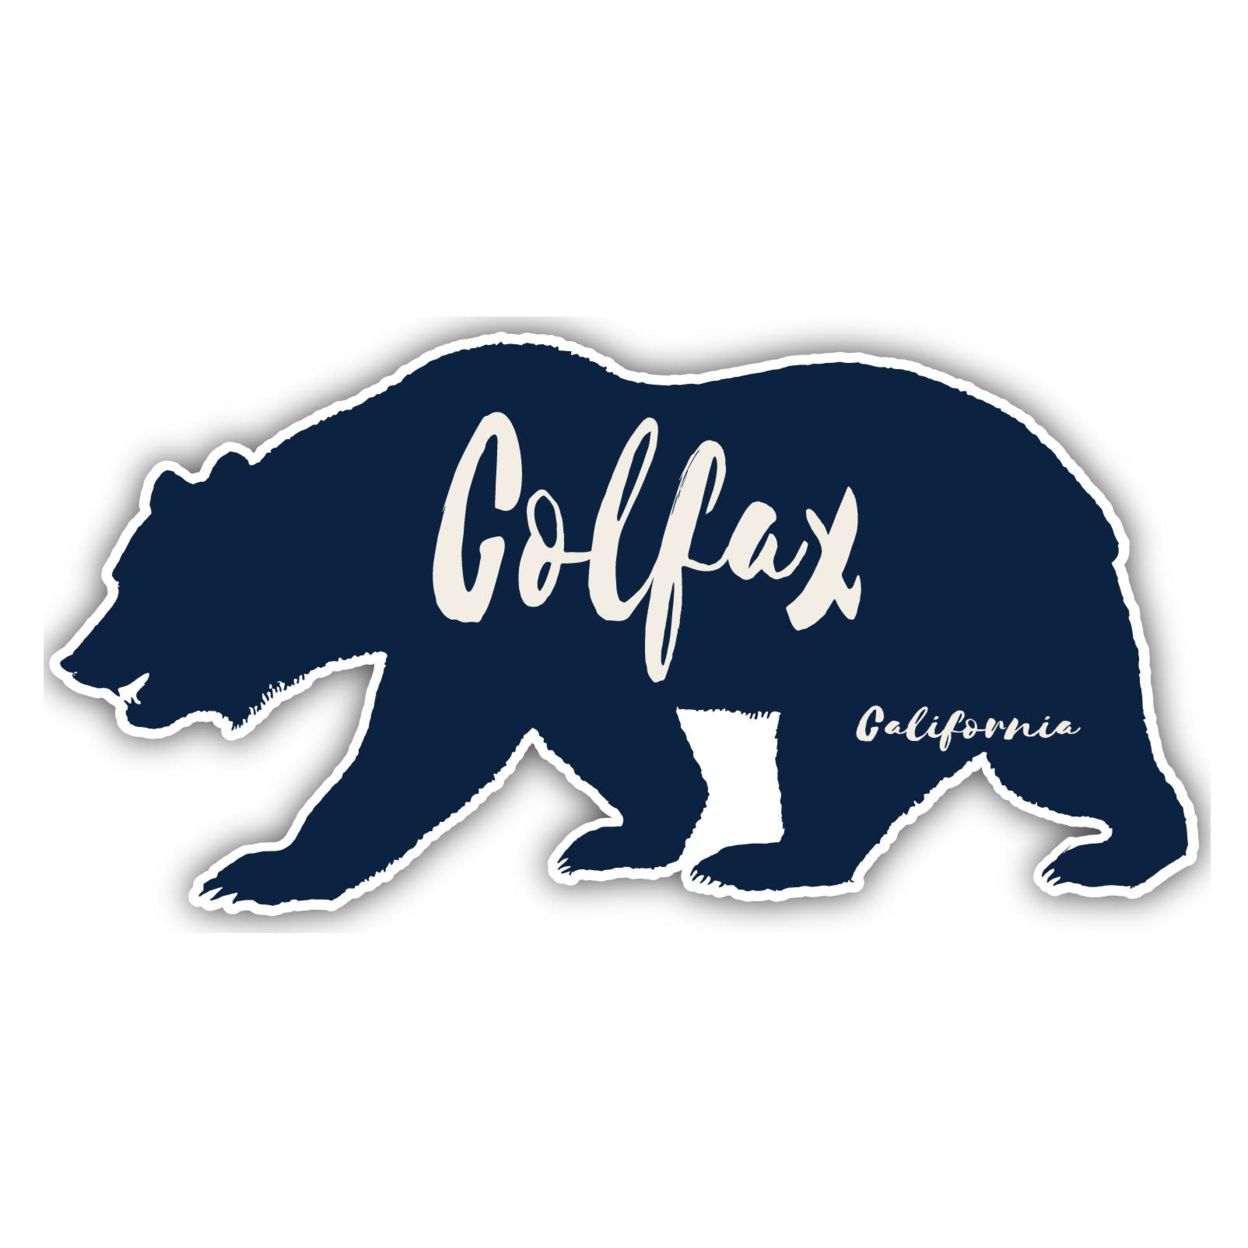 Colfax California Souvenir Decorative Stickers (Choose Theme And Size) - 4-Pack, 4-Inch, Bear